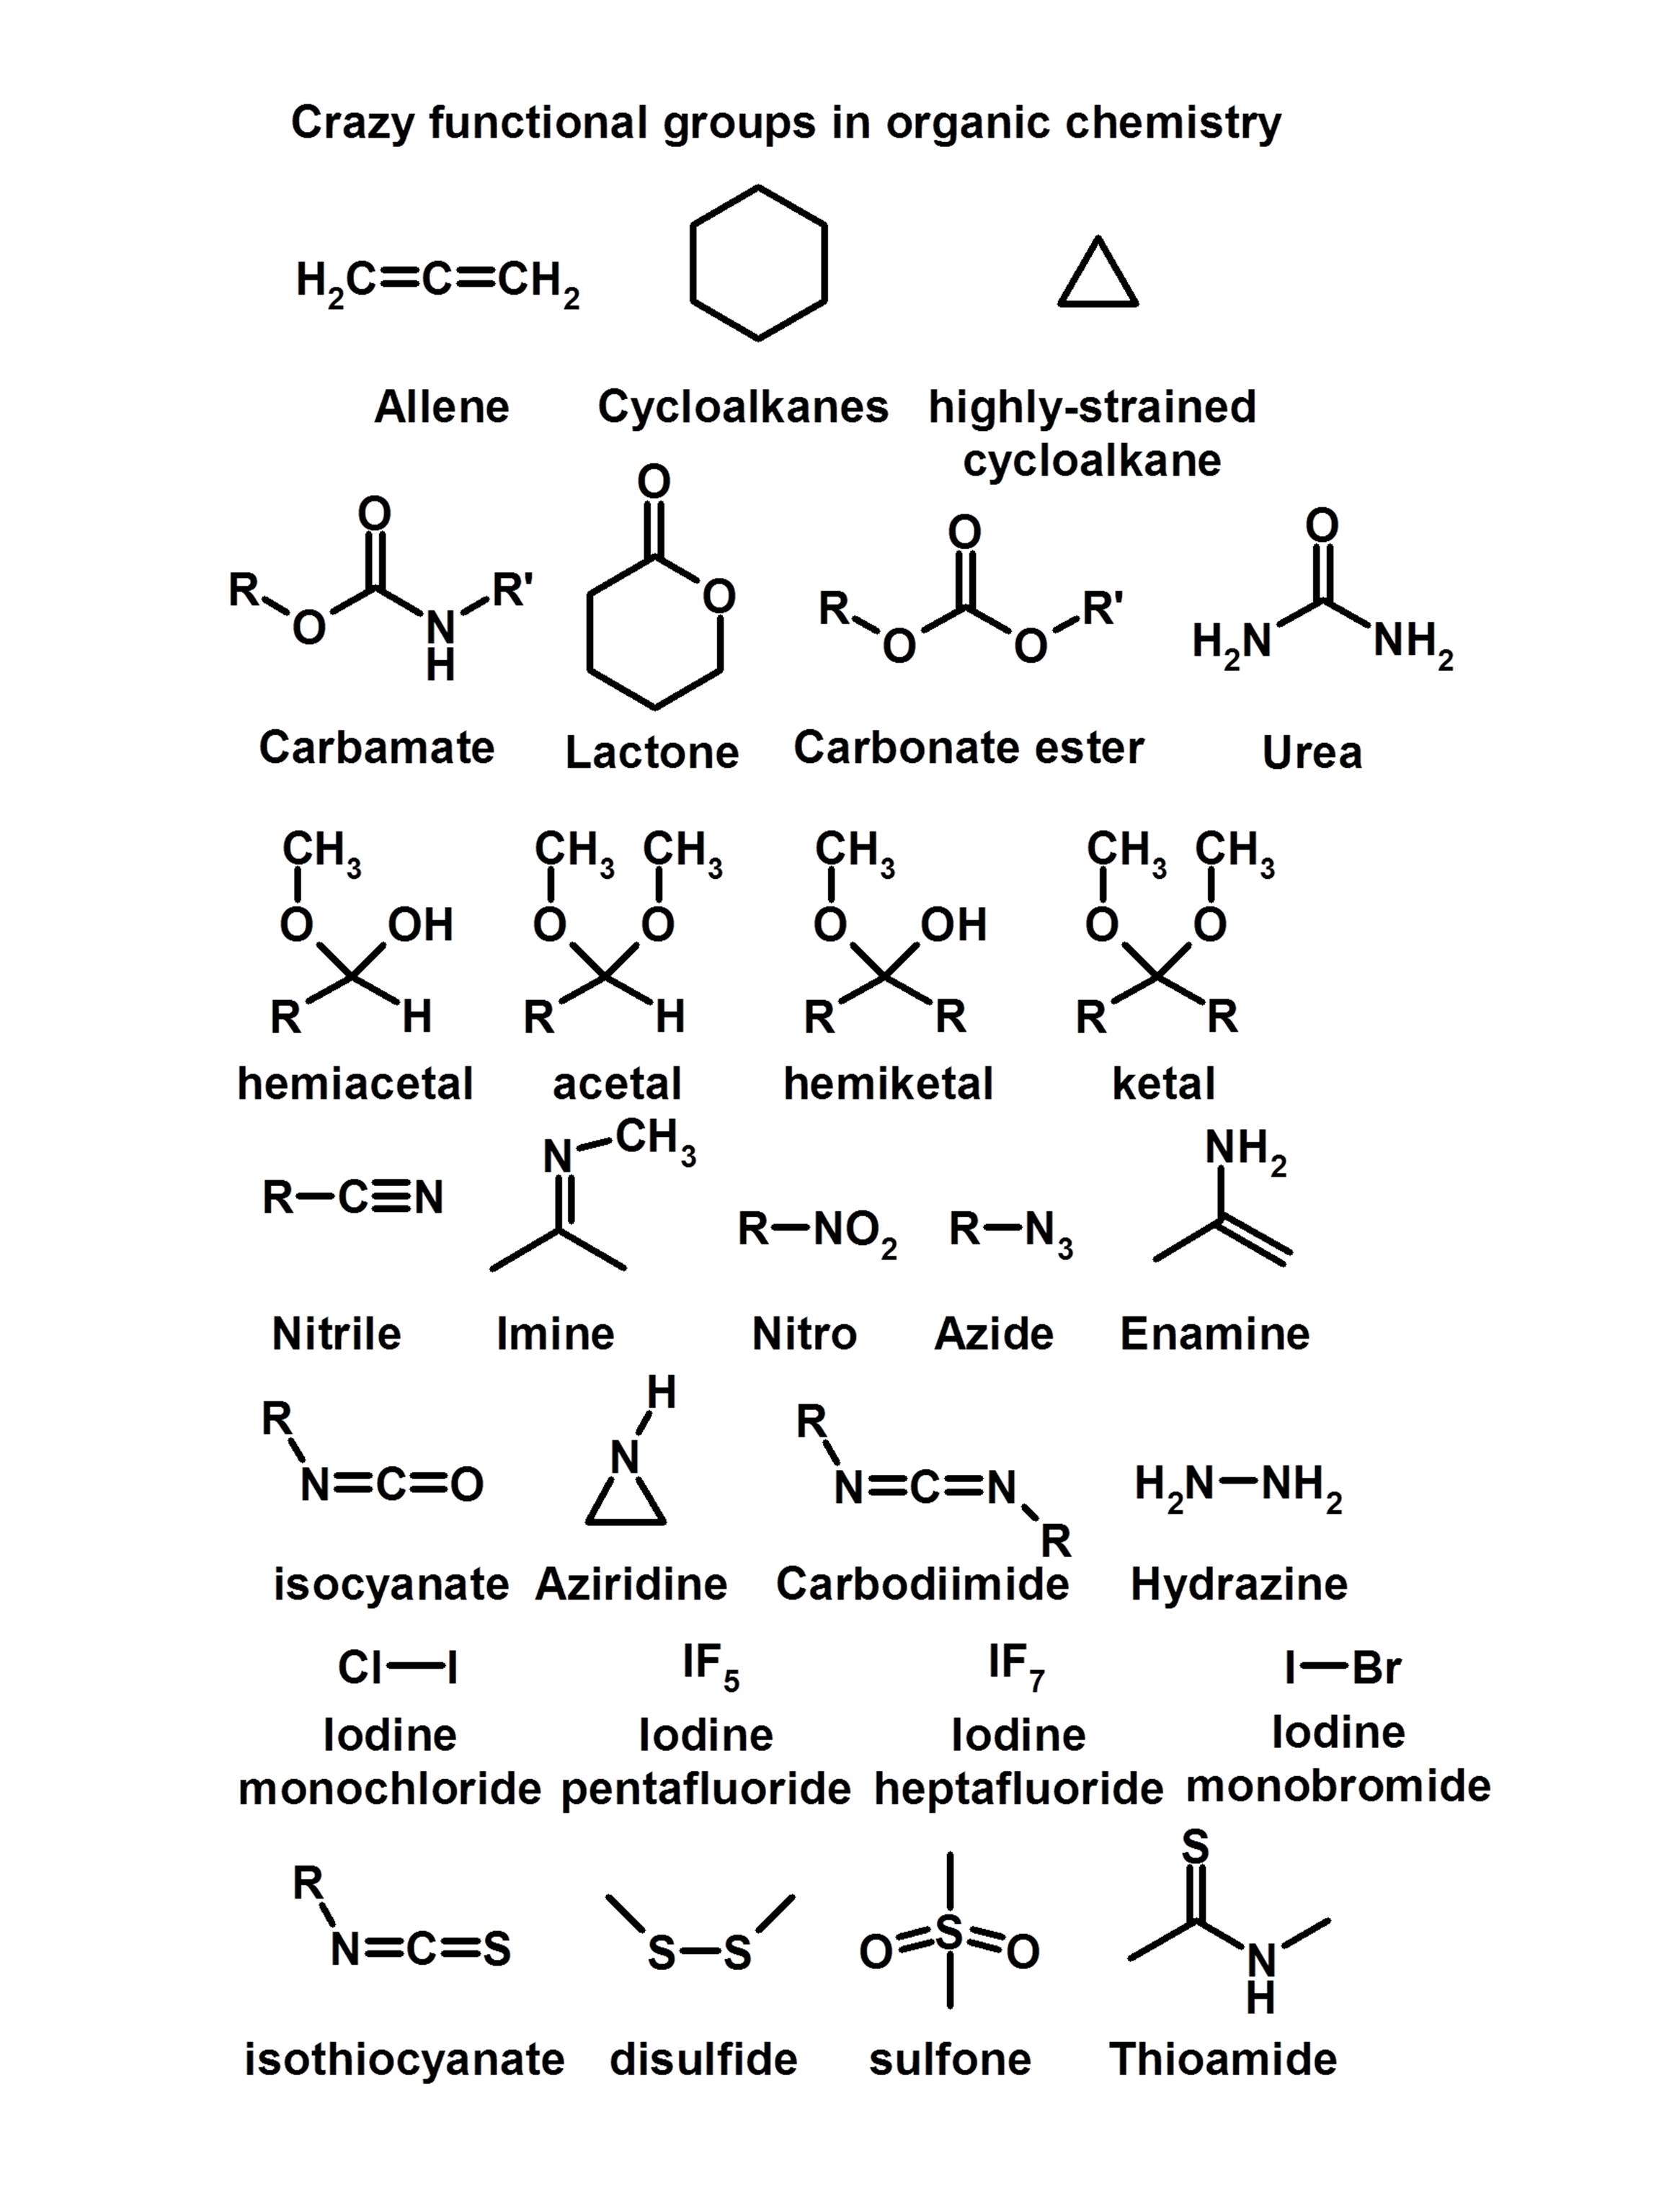 Functional Groups in Organic Chemistry